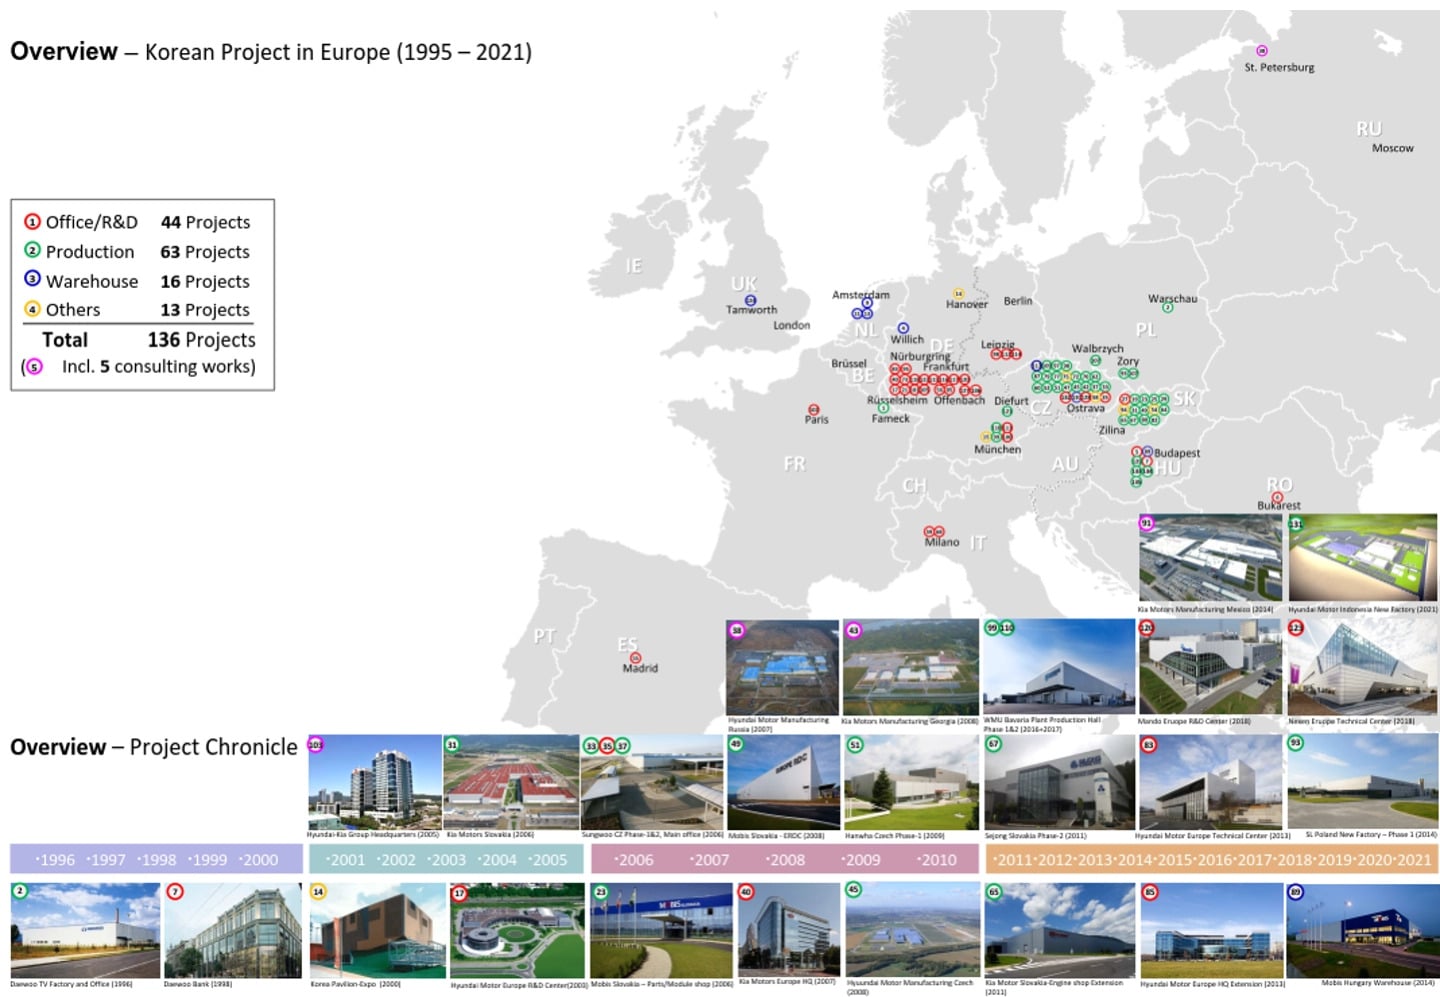 Euromap with markings for Korean projects (1995-2021) incl. photos of selected buildings and chronological overview.